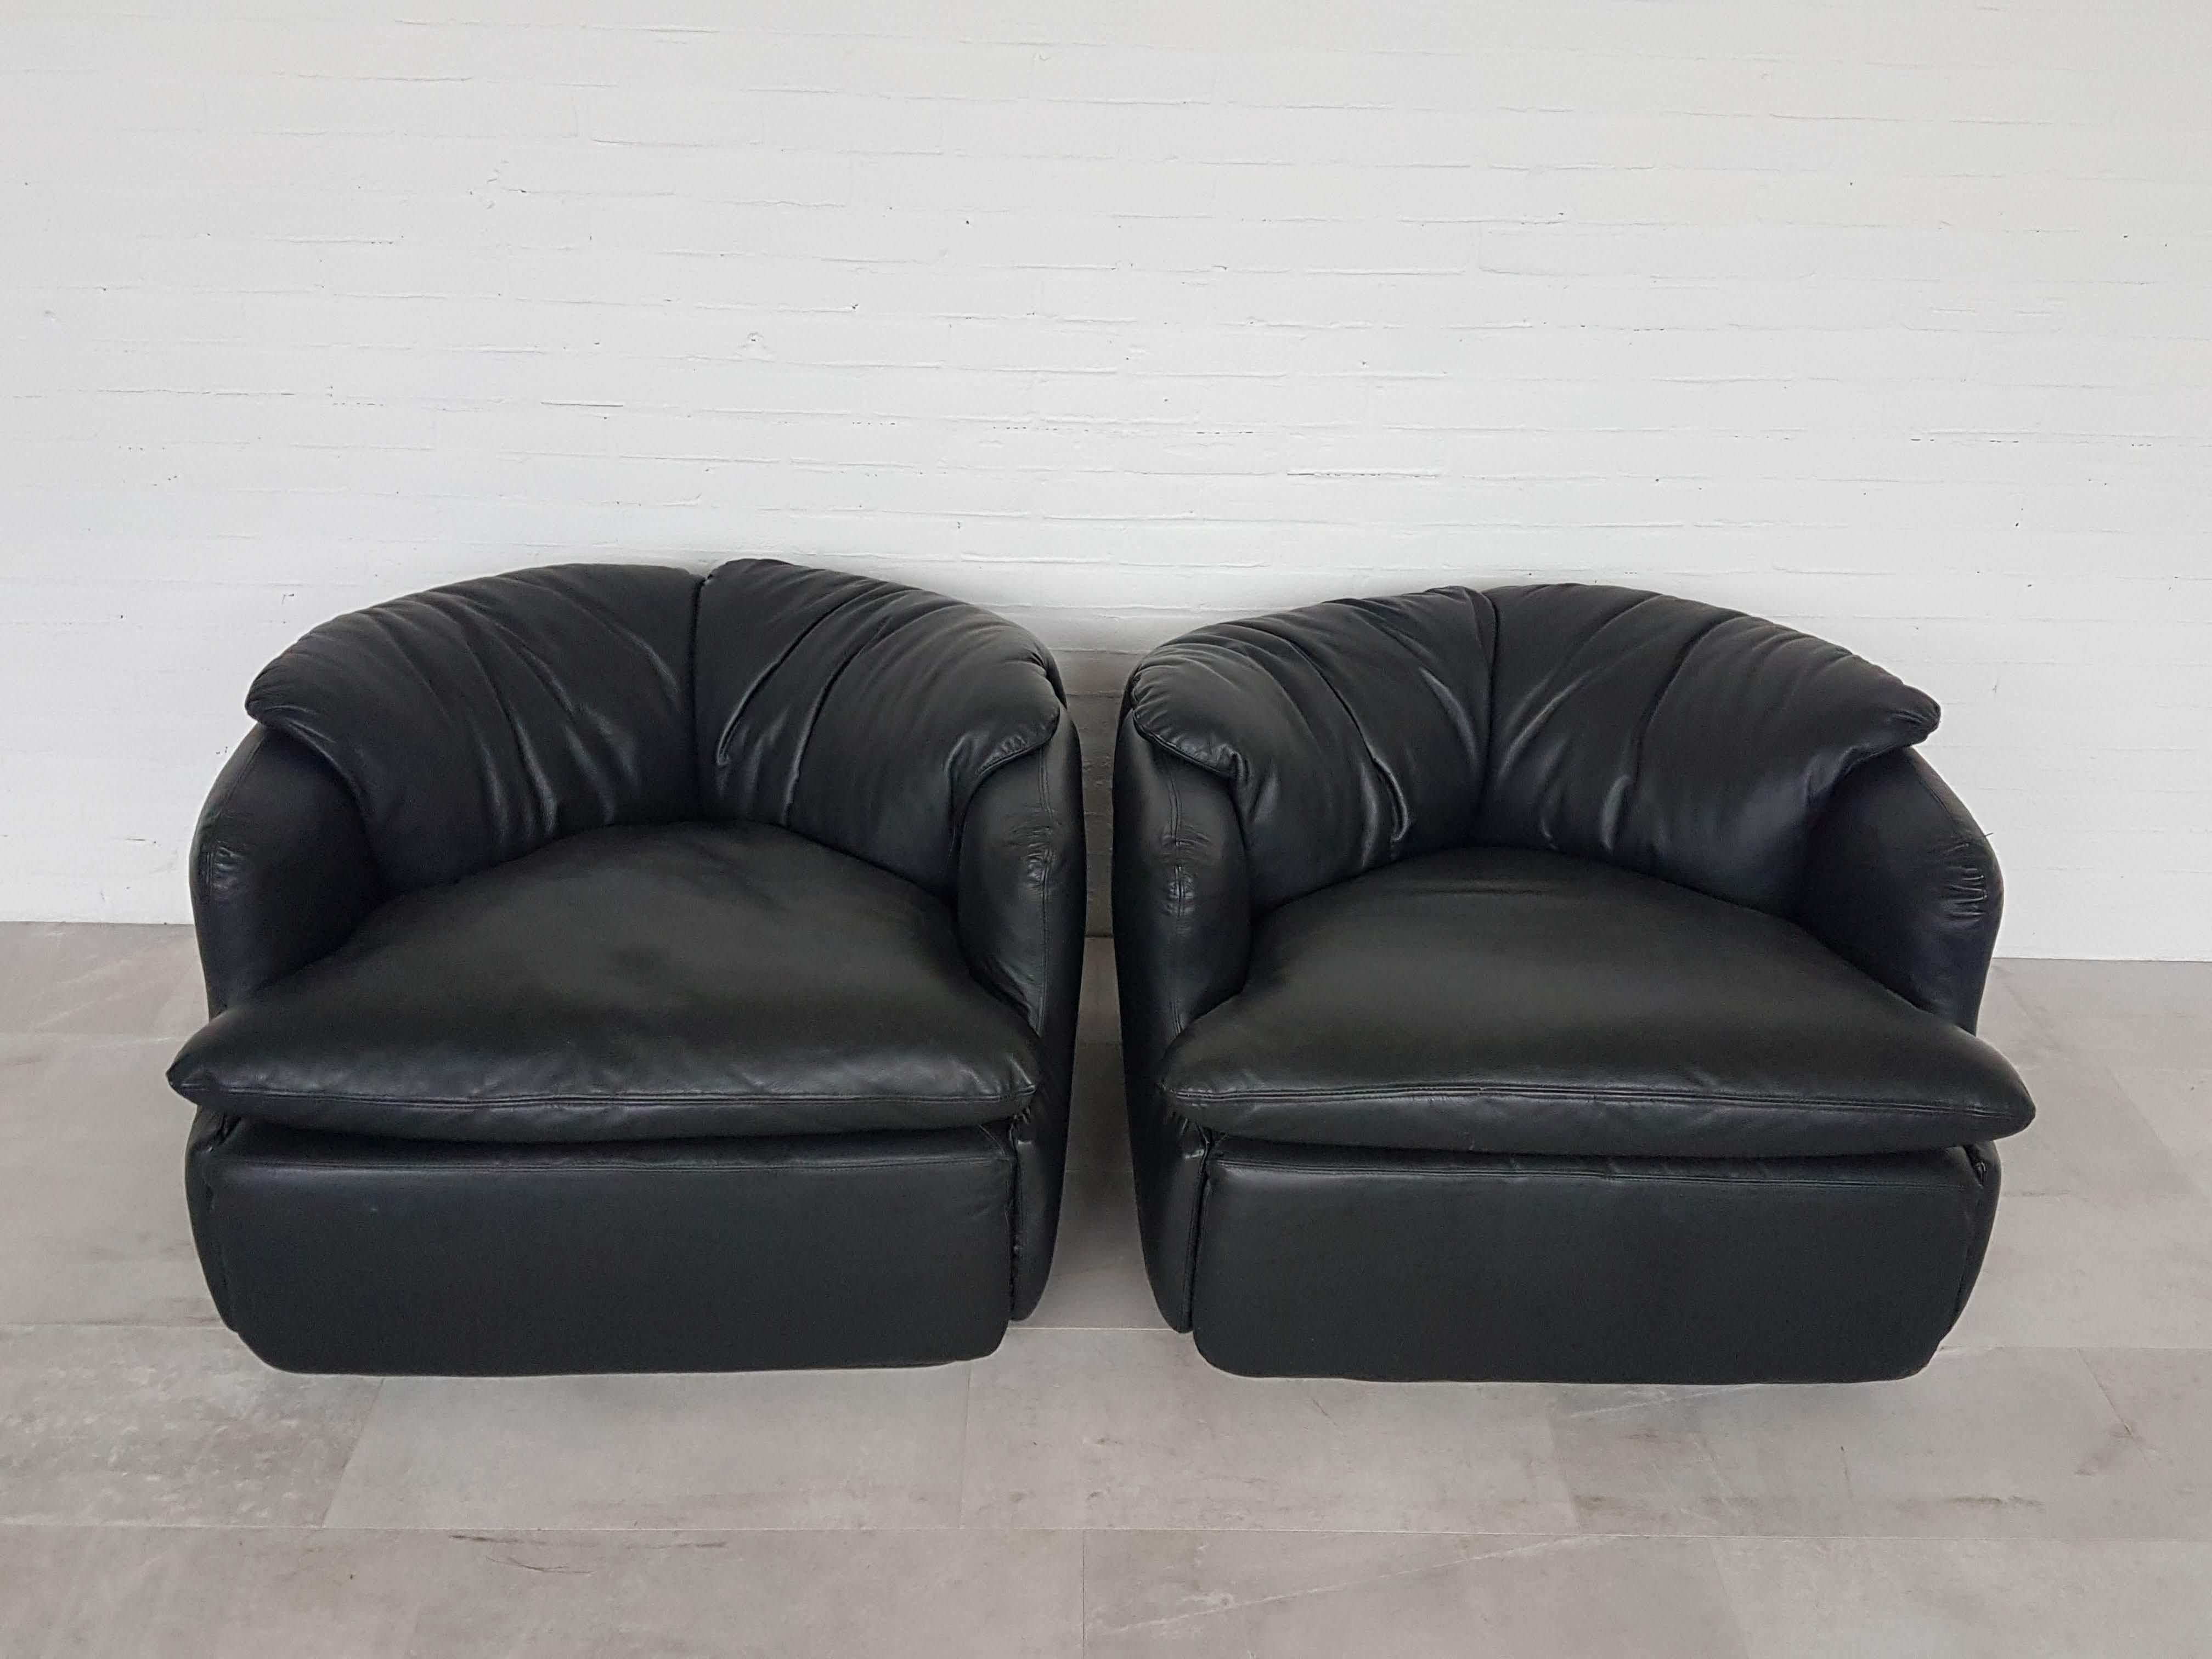 Mid-Century Modern Saporiti confidential seating group from the 1970s designed by Alberto Rosselli. In Original black leather. Would fit well in a Space Age or Brutalist inspired interior. The low height and well designed back part make it a